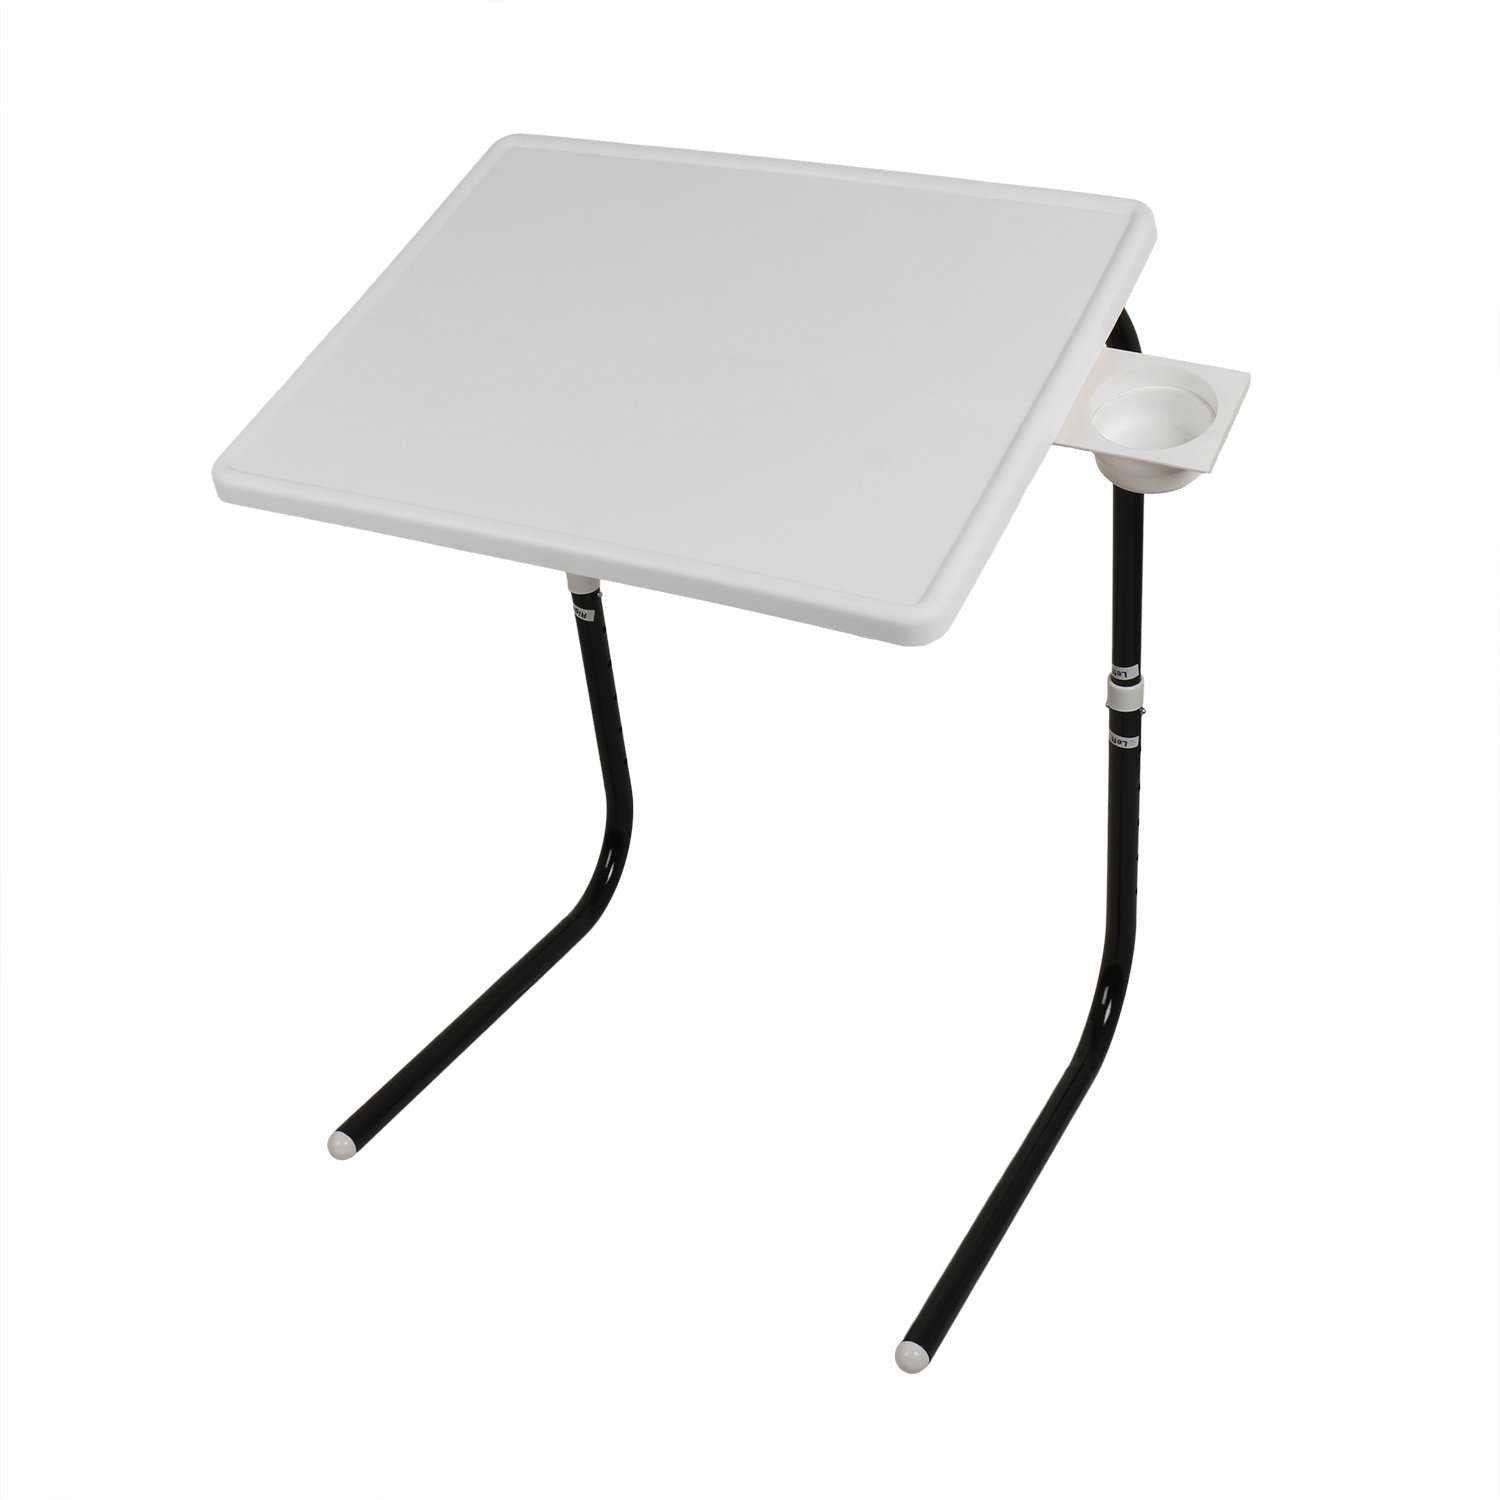  Table mate with black legs and white finishing | Wudore